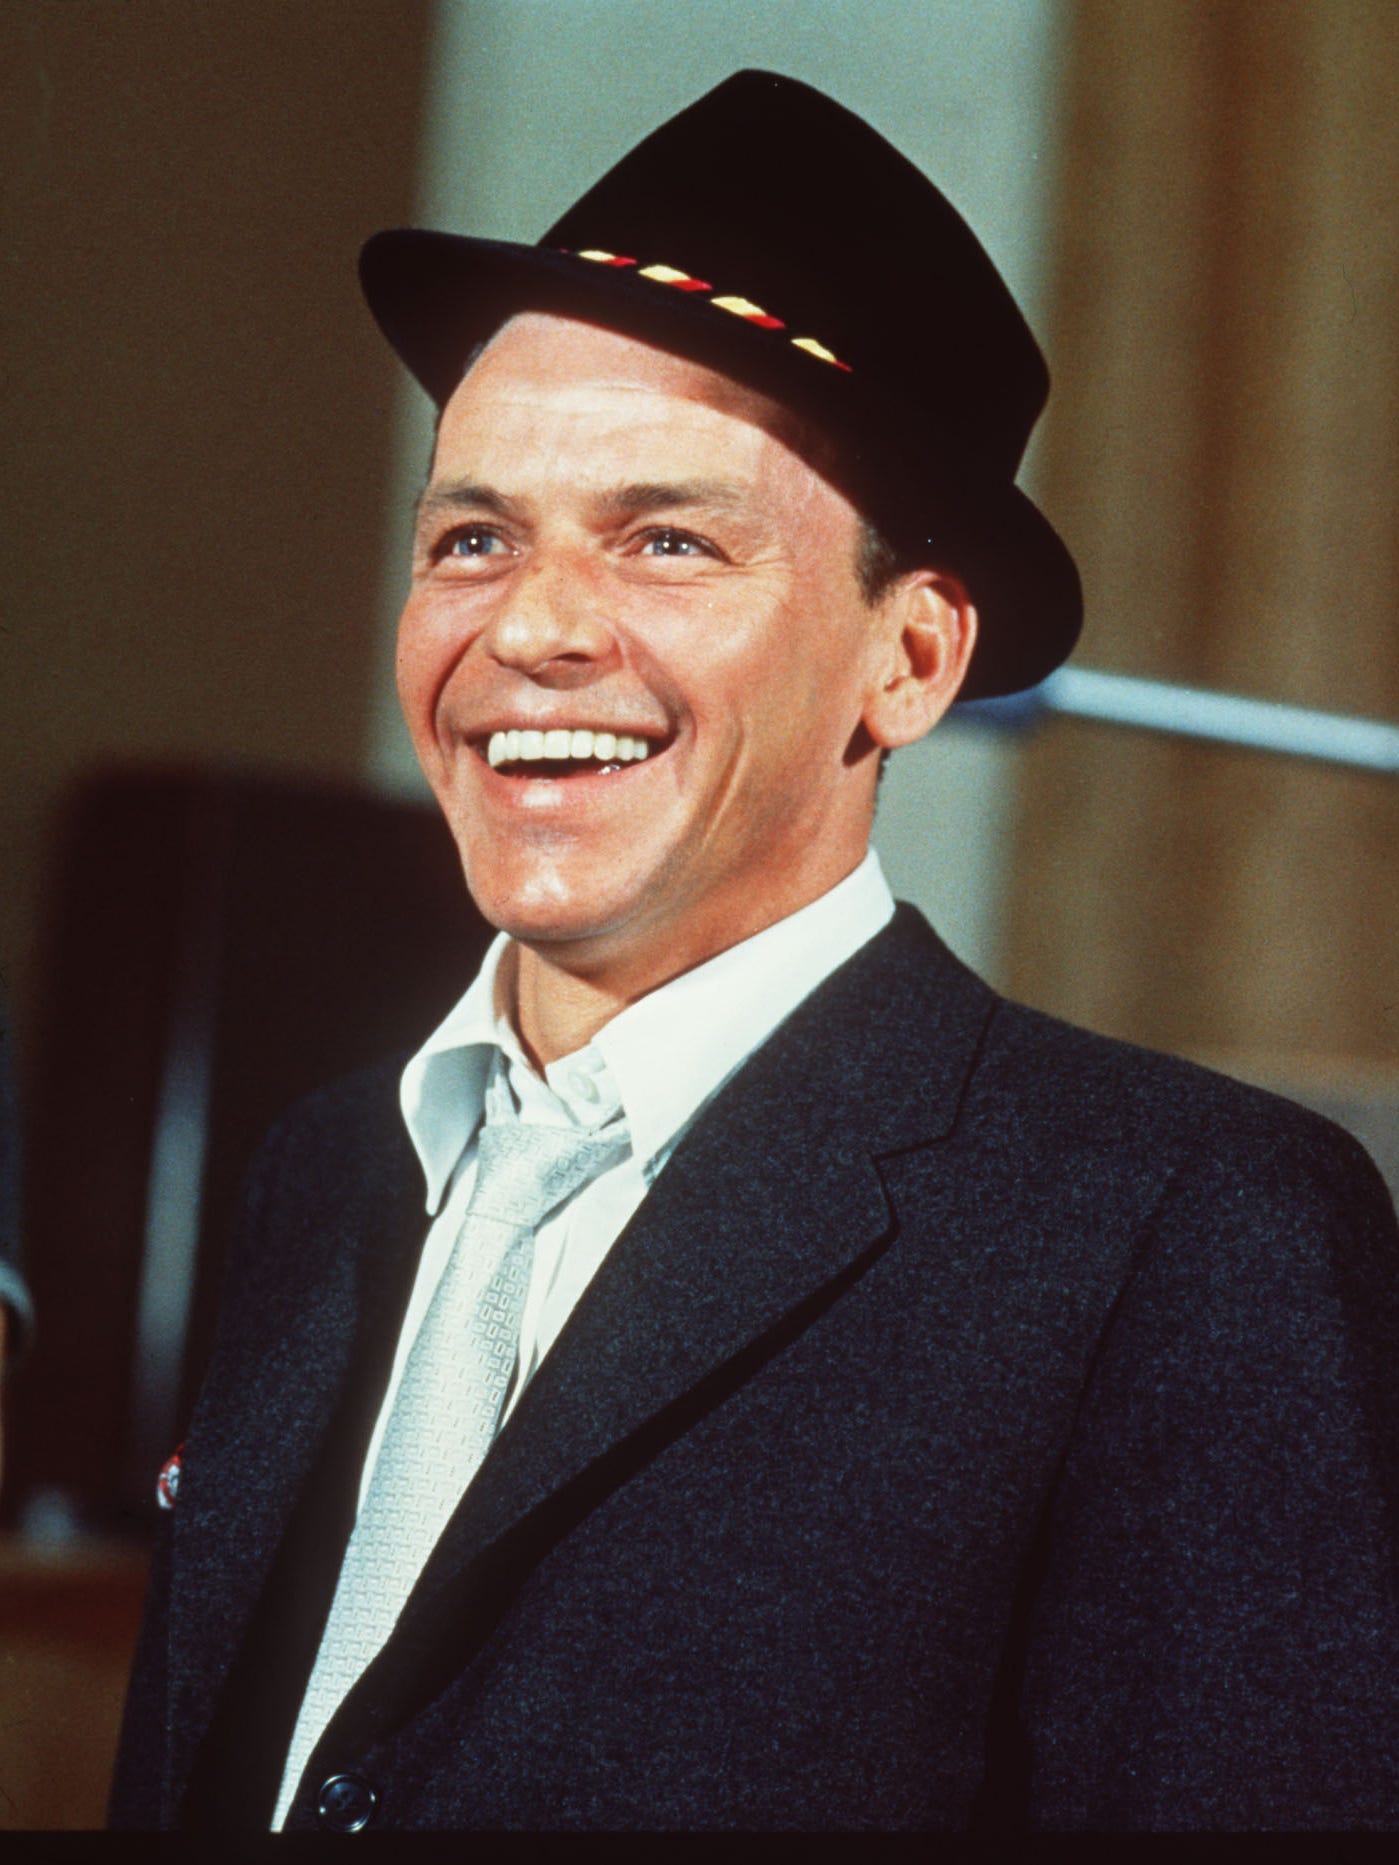 Remembering Frank Sinatra, the voice of a century